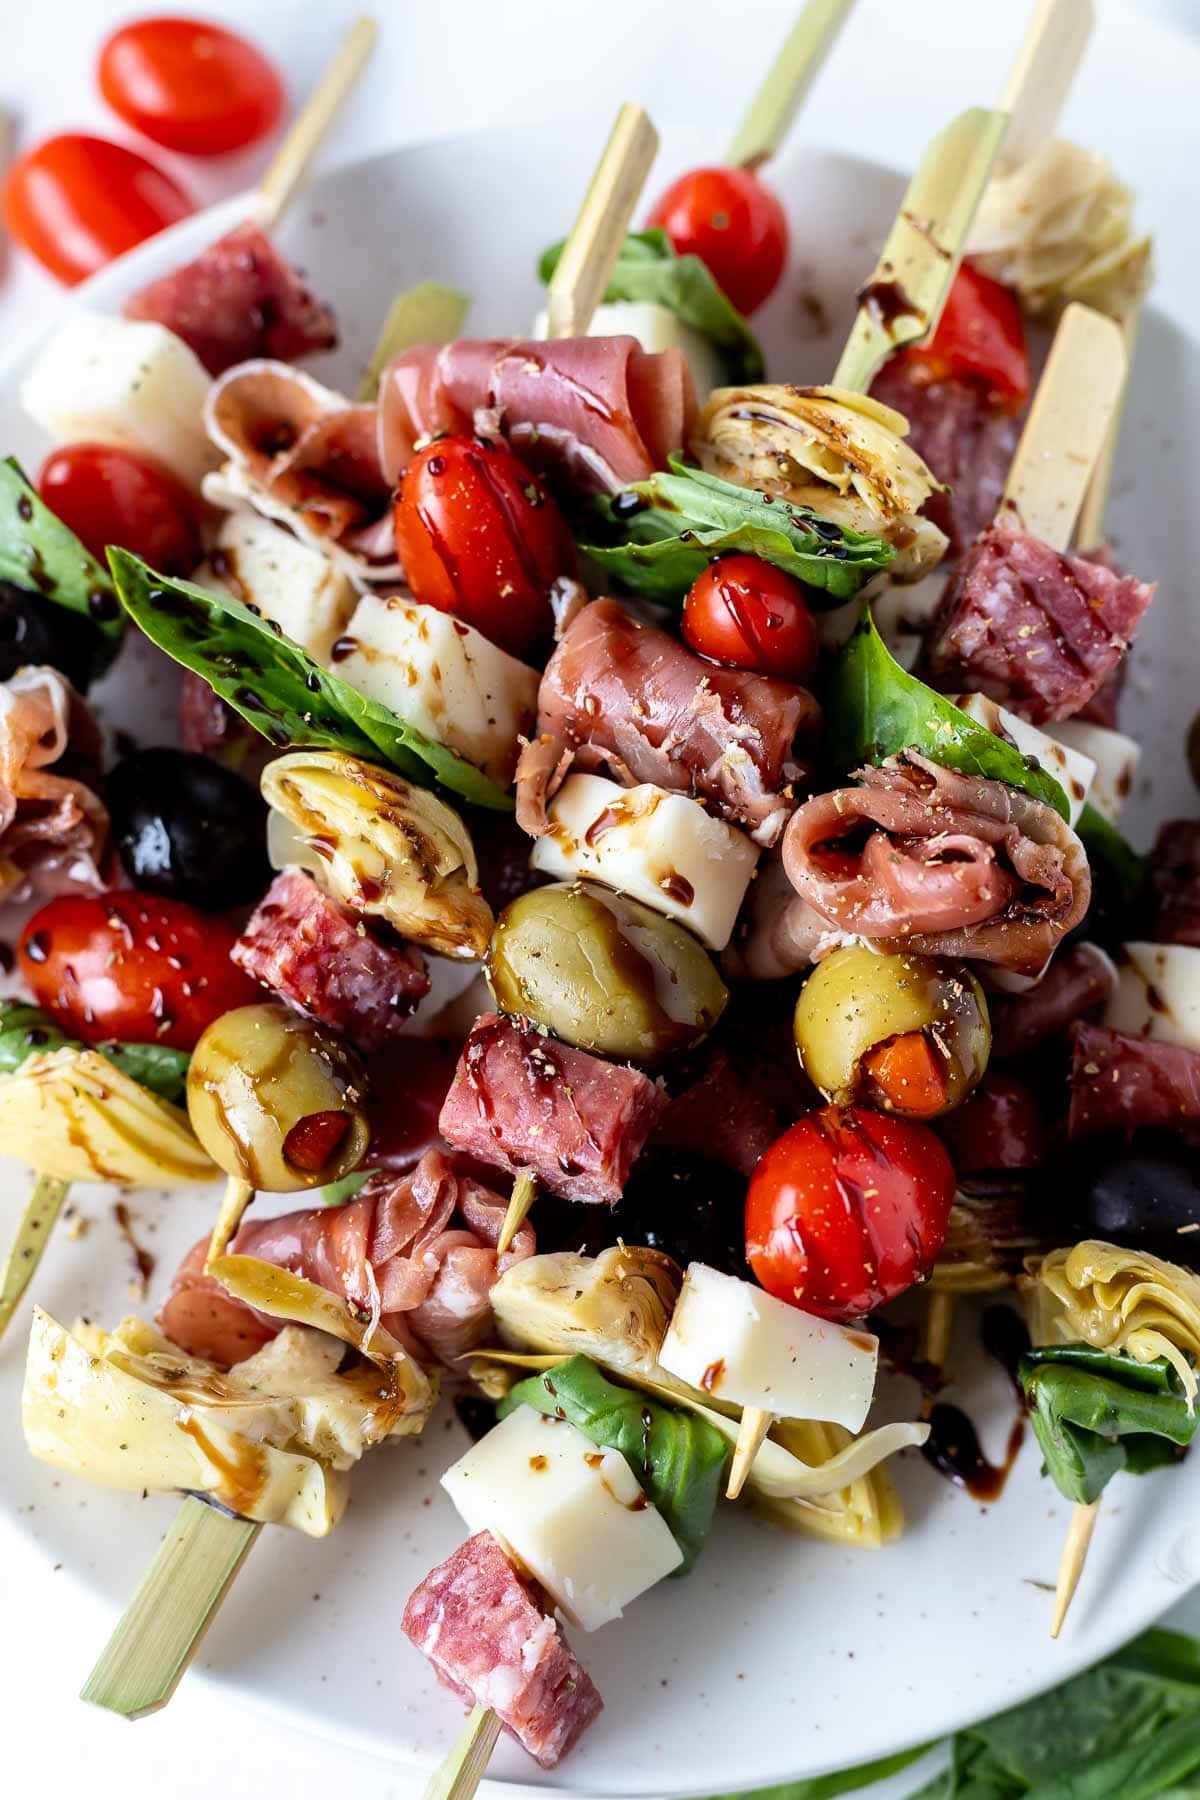 Antipasto skewers made with meat, cheese, olives and cherry tomatoes drizzled with sauce. 